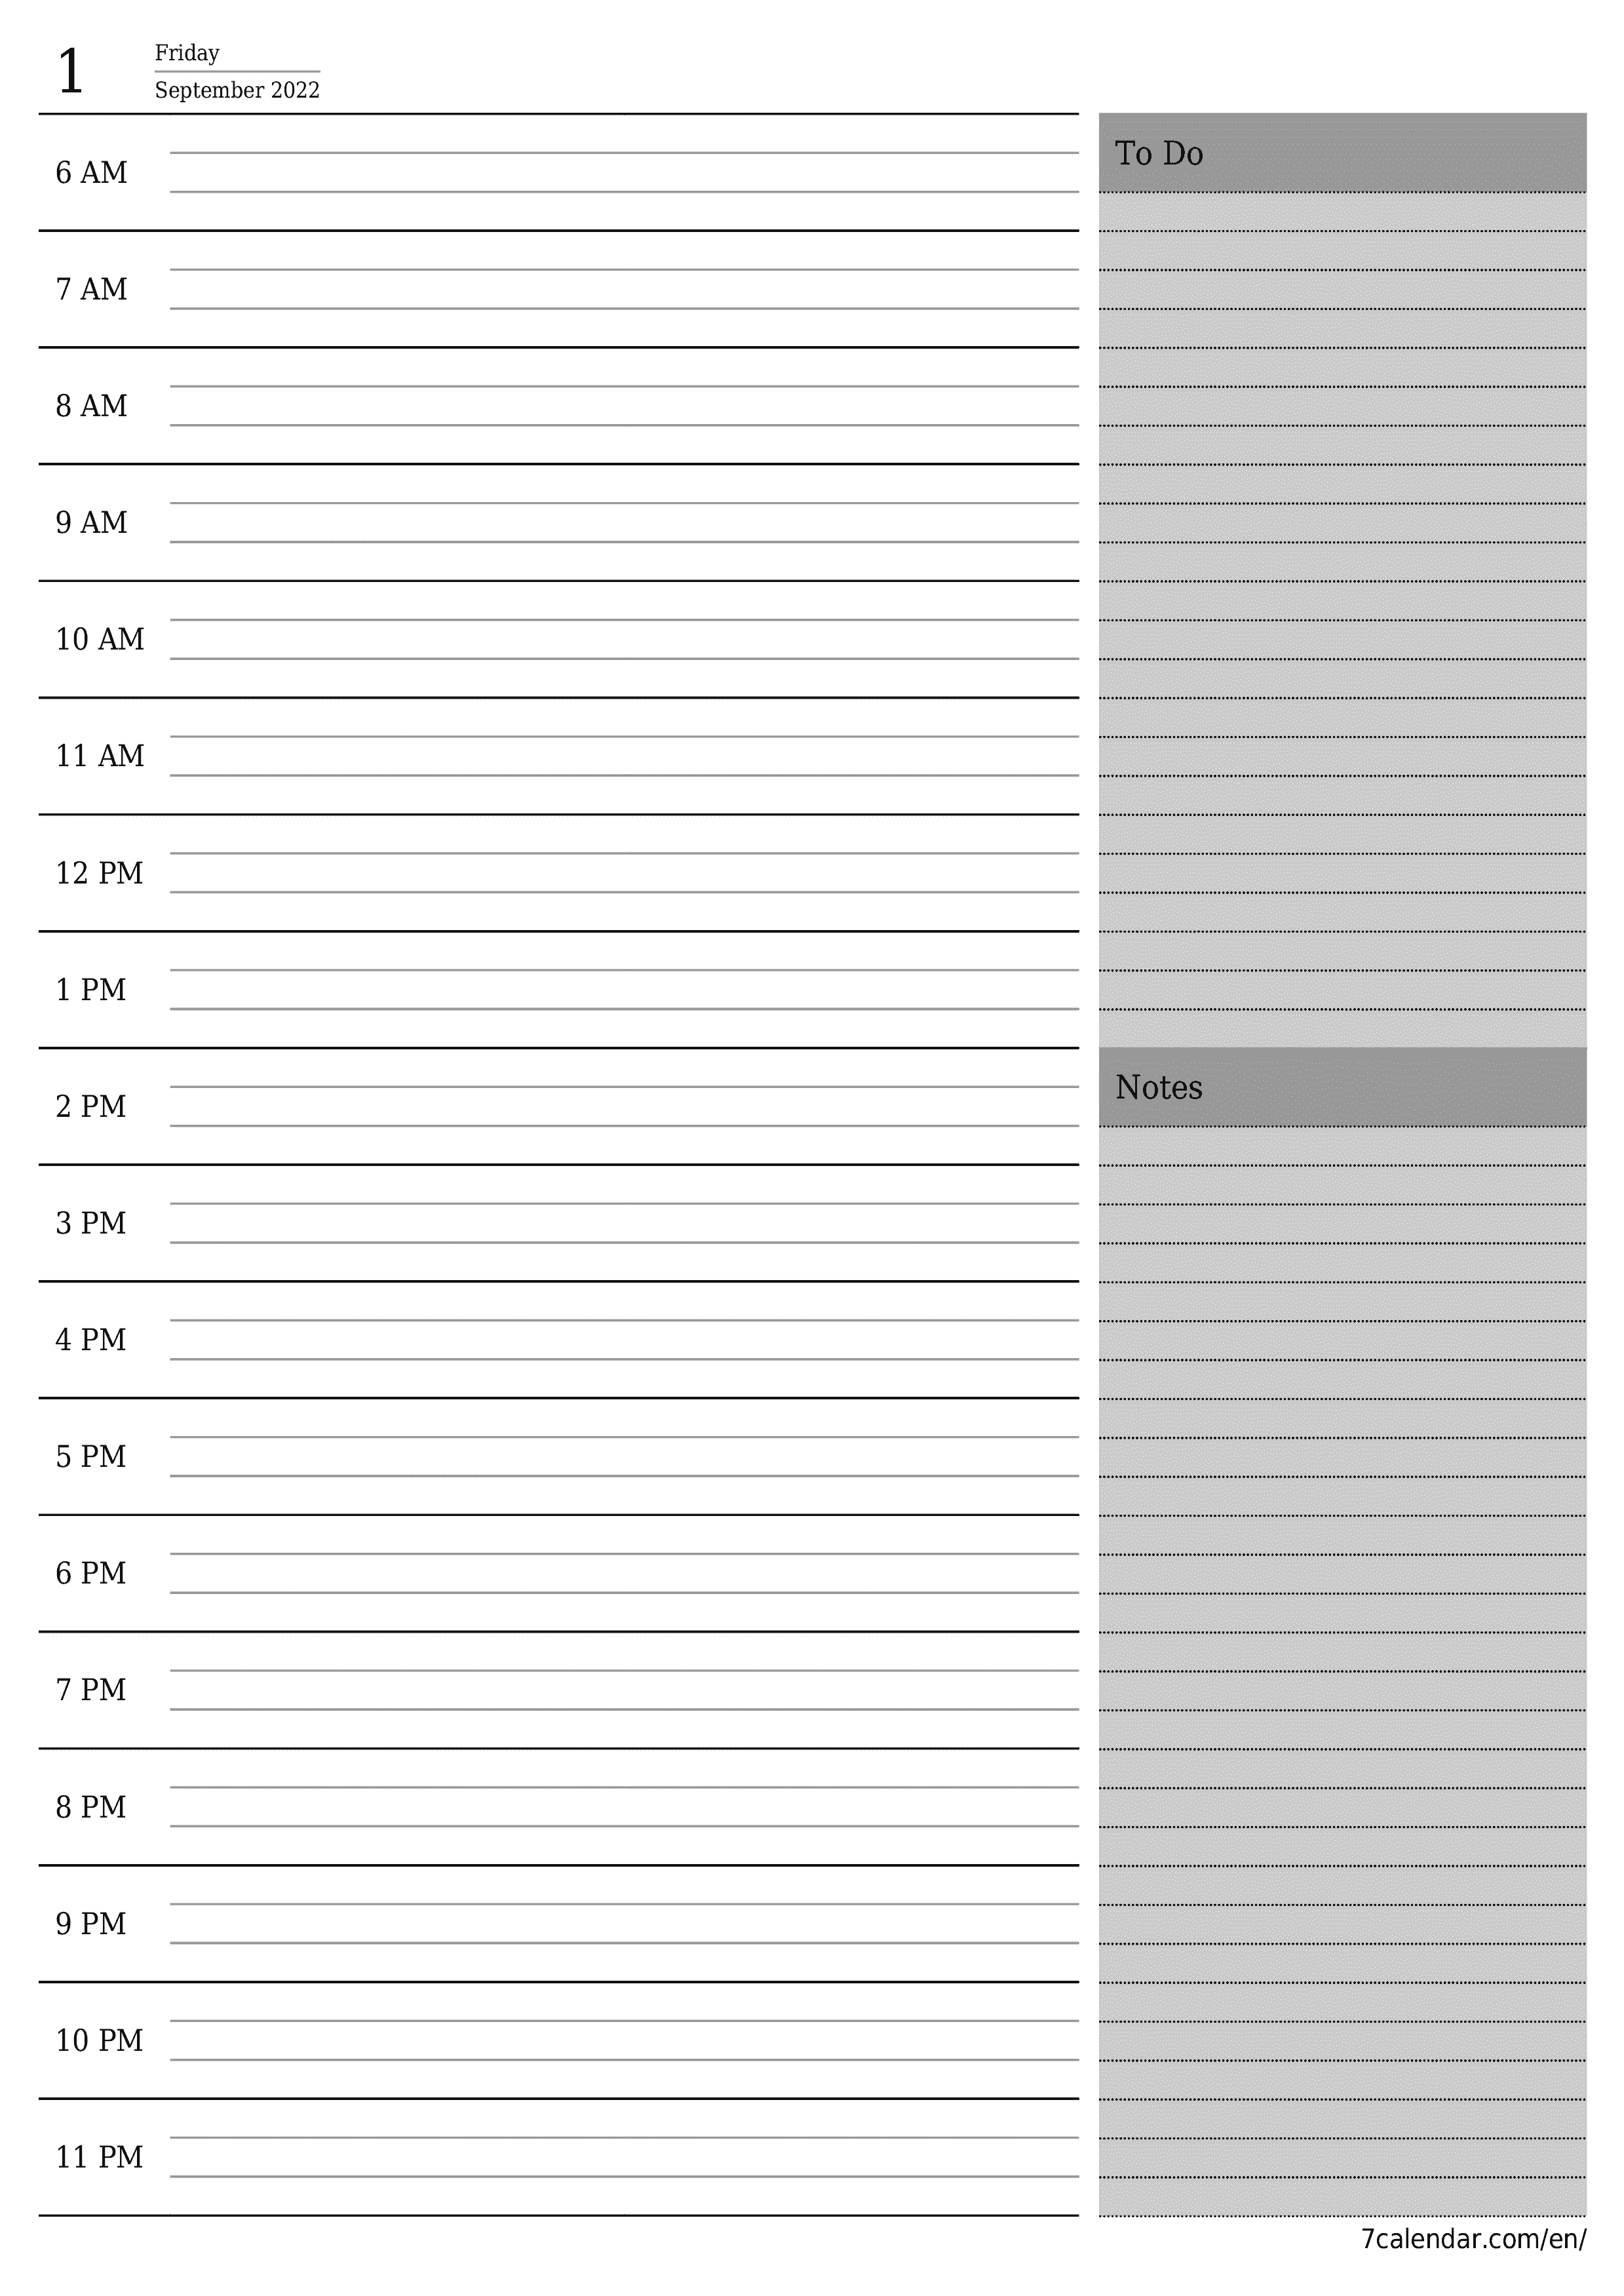 Blank daily calendar planner for day September 2022 with notes, save and print to PDF PNG English - 7calendar.com